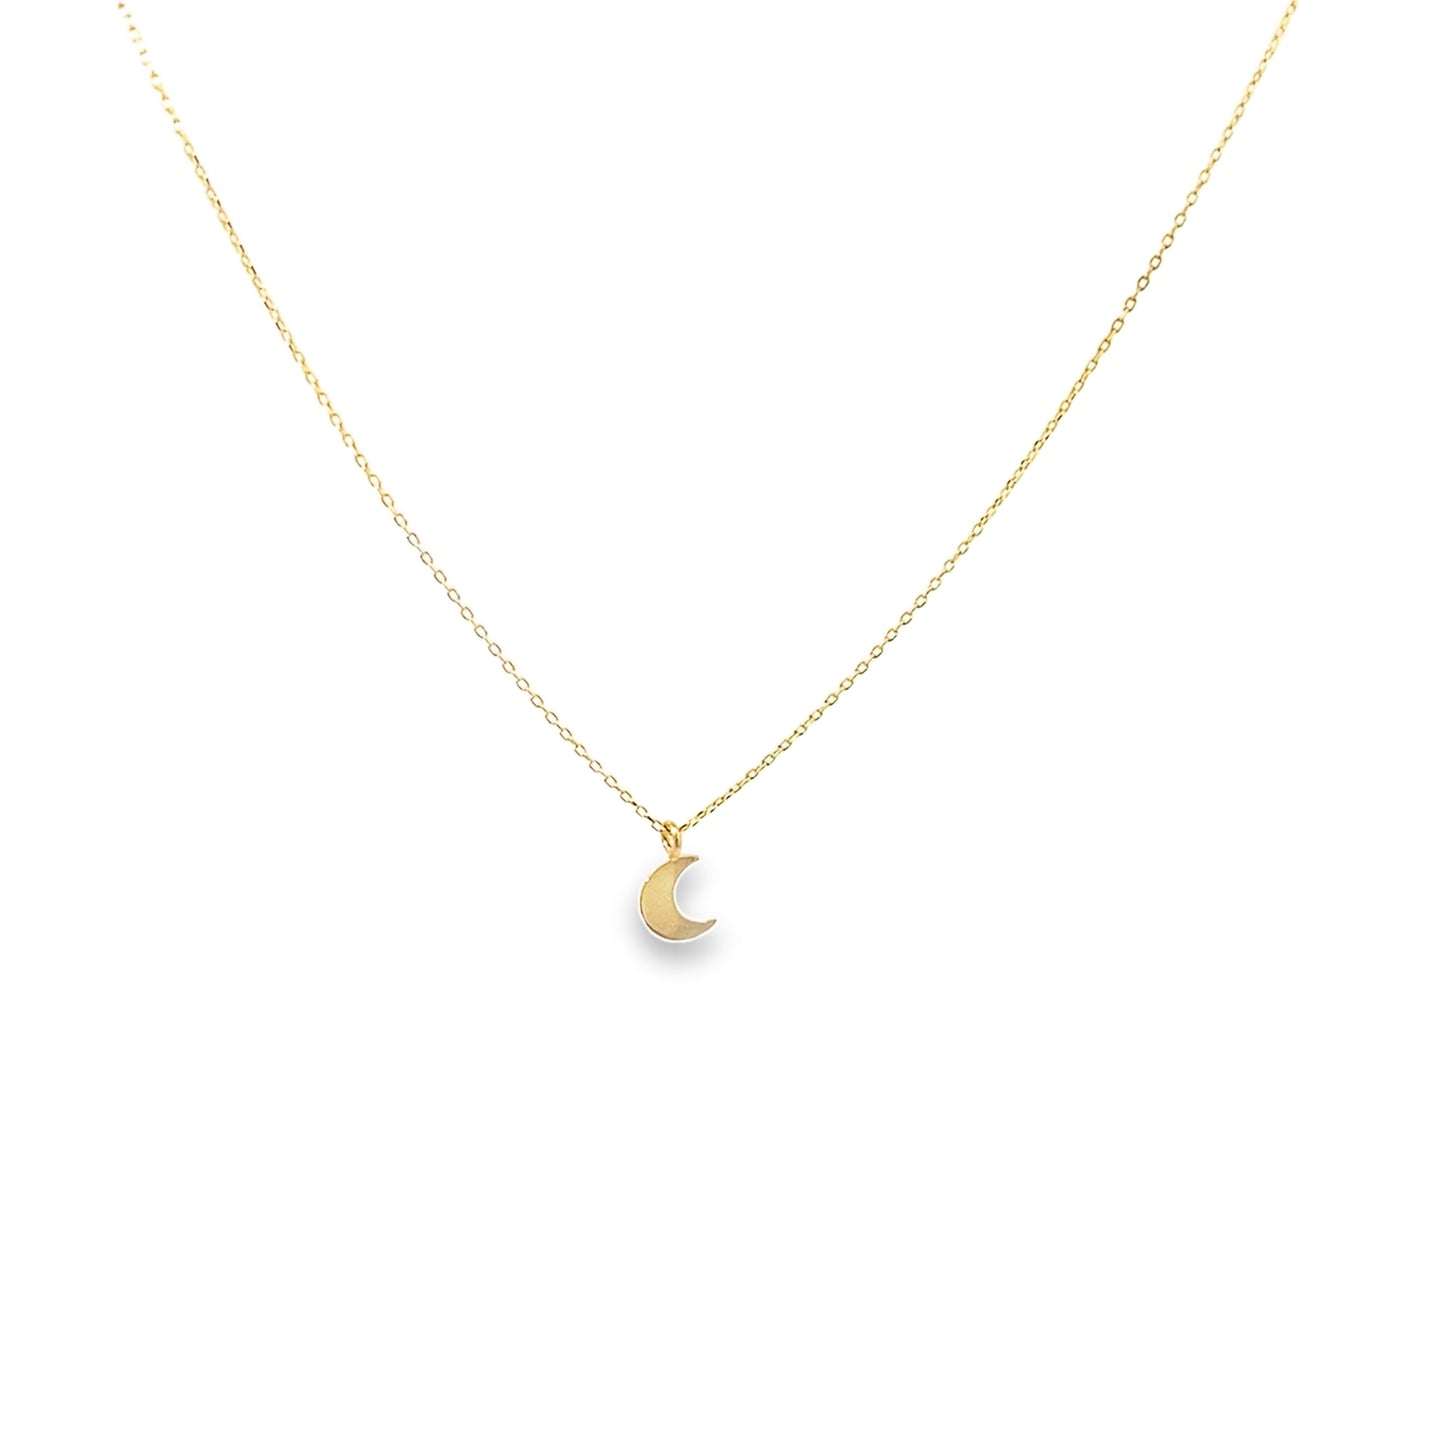 14K Yellow Gold Small Moon Pendant Necklace 18In